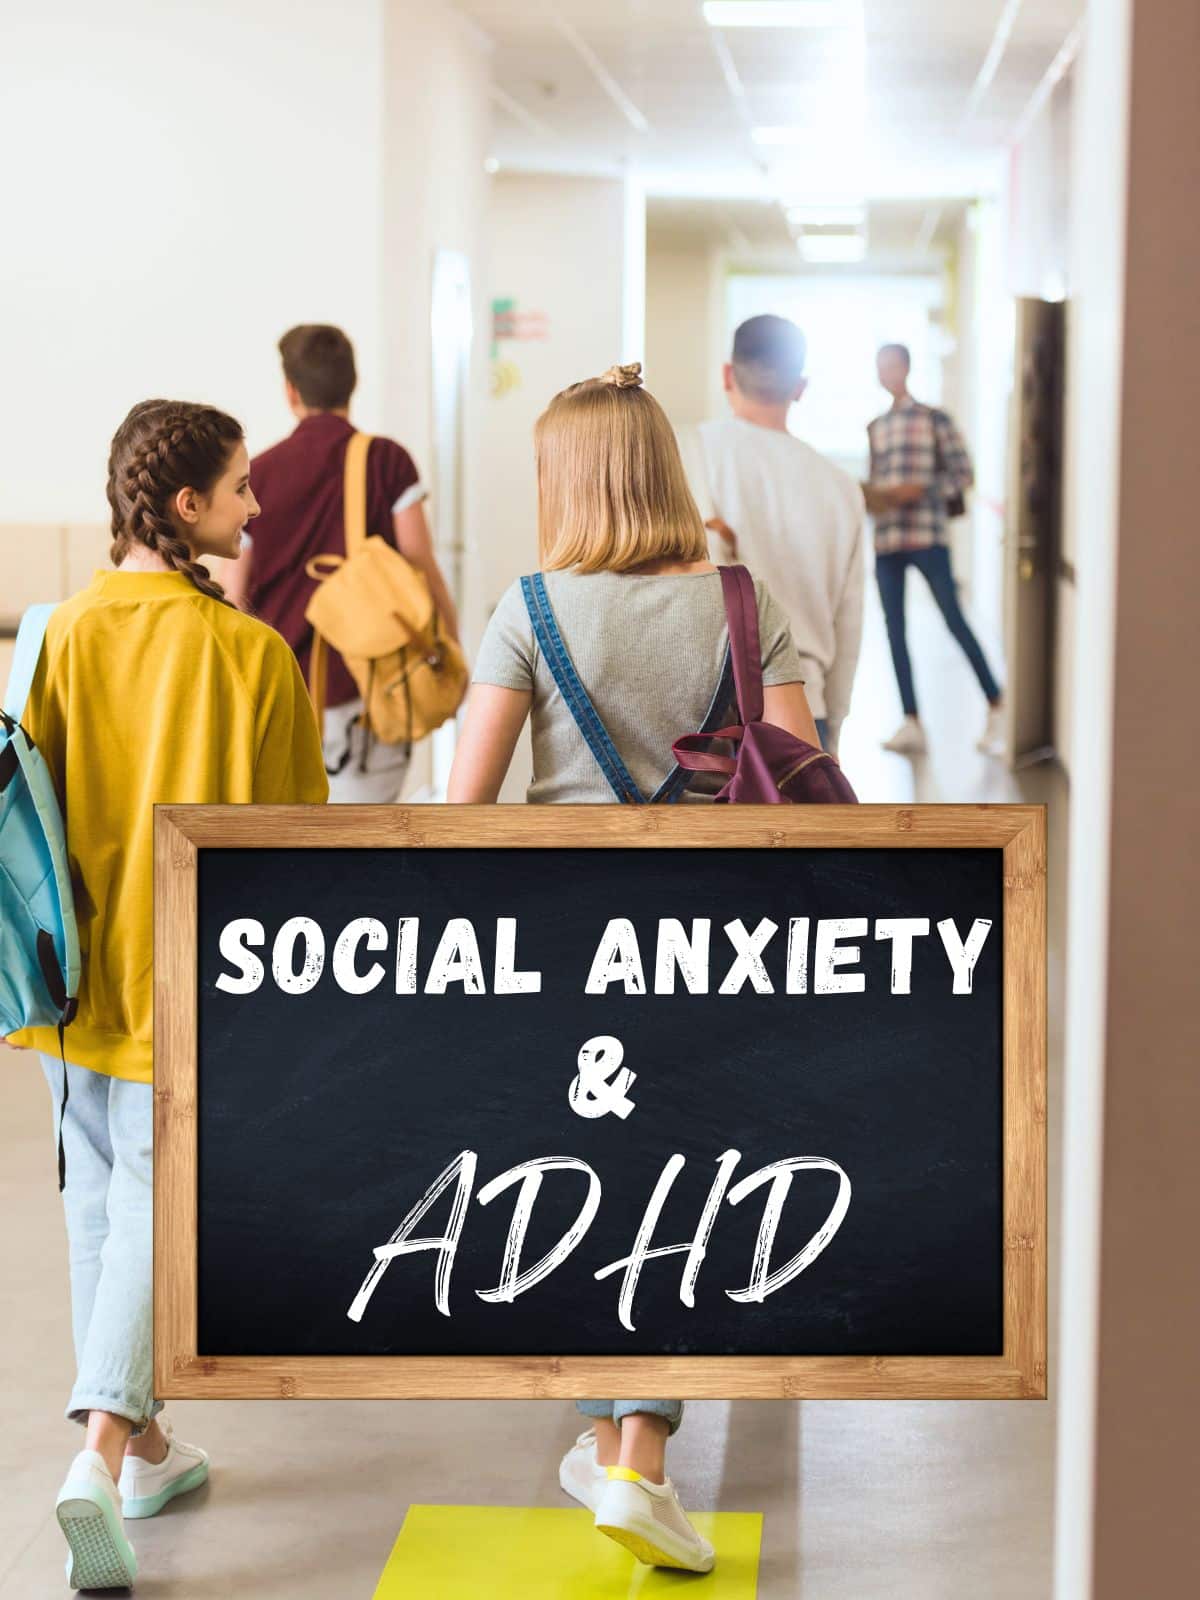 The backs of some teens walking in a school with the text "social anxiety & ADHD."